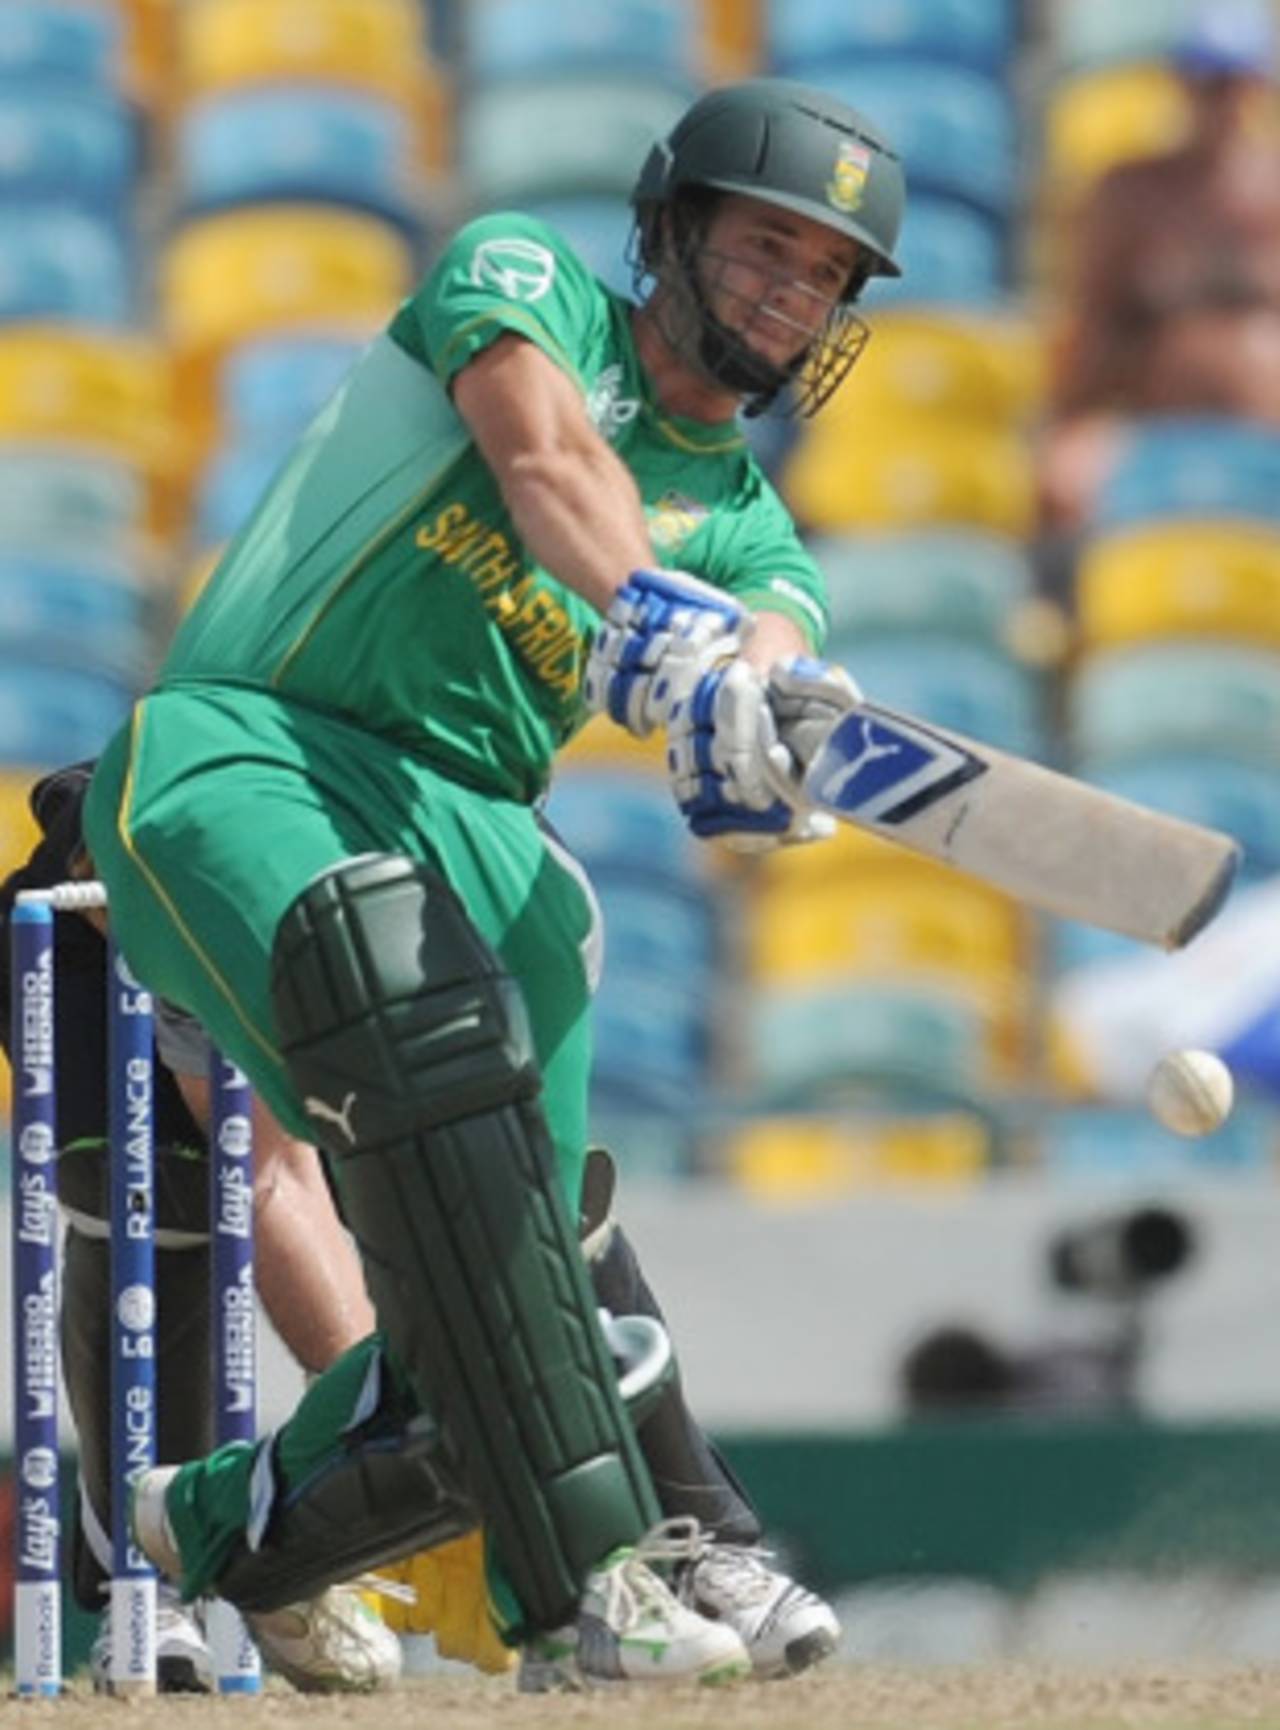 Albie Morkel made a mockery of the low full tosses dished out by New Zealand, tonking five huge sixes in his 40&nbsp;&nbsp;&bull;&nbsp;&nbsp;AFP